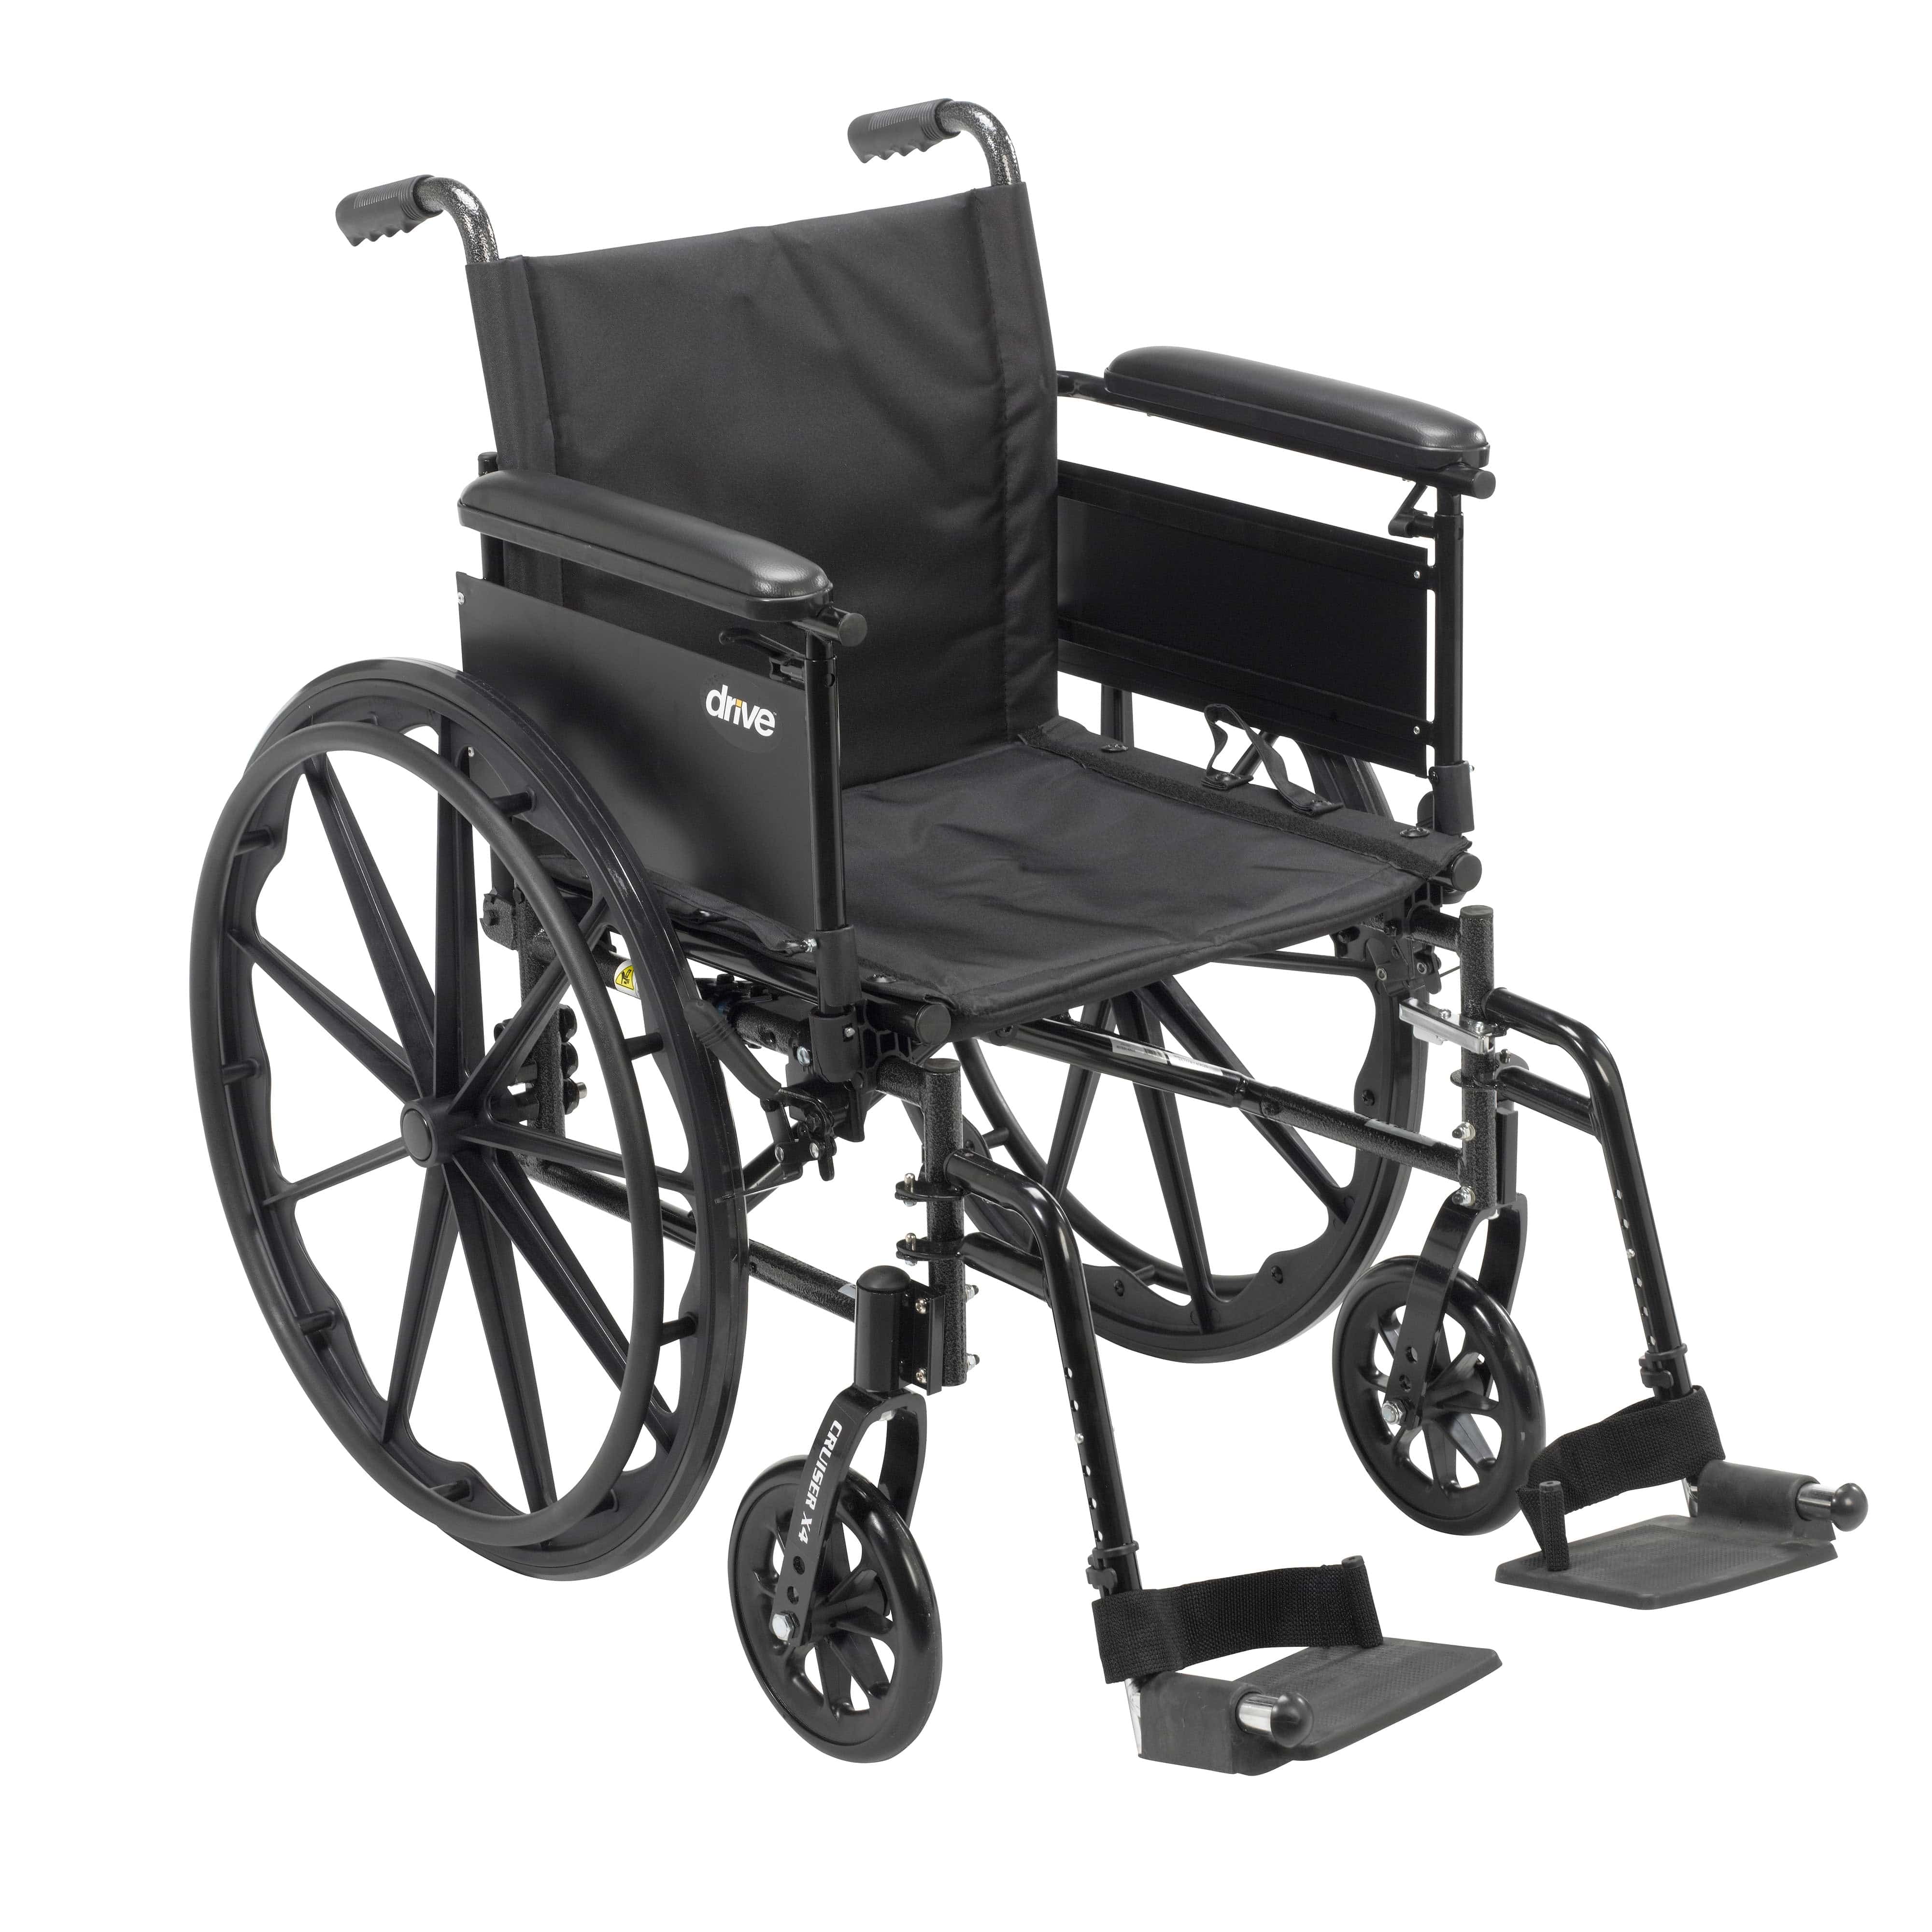 Drive Medical Drive Medical Cruiser X4 Lightweight Dual Axle Wheelchair with Adjustable Detatchable Arms CX416ADFA-SF